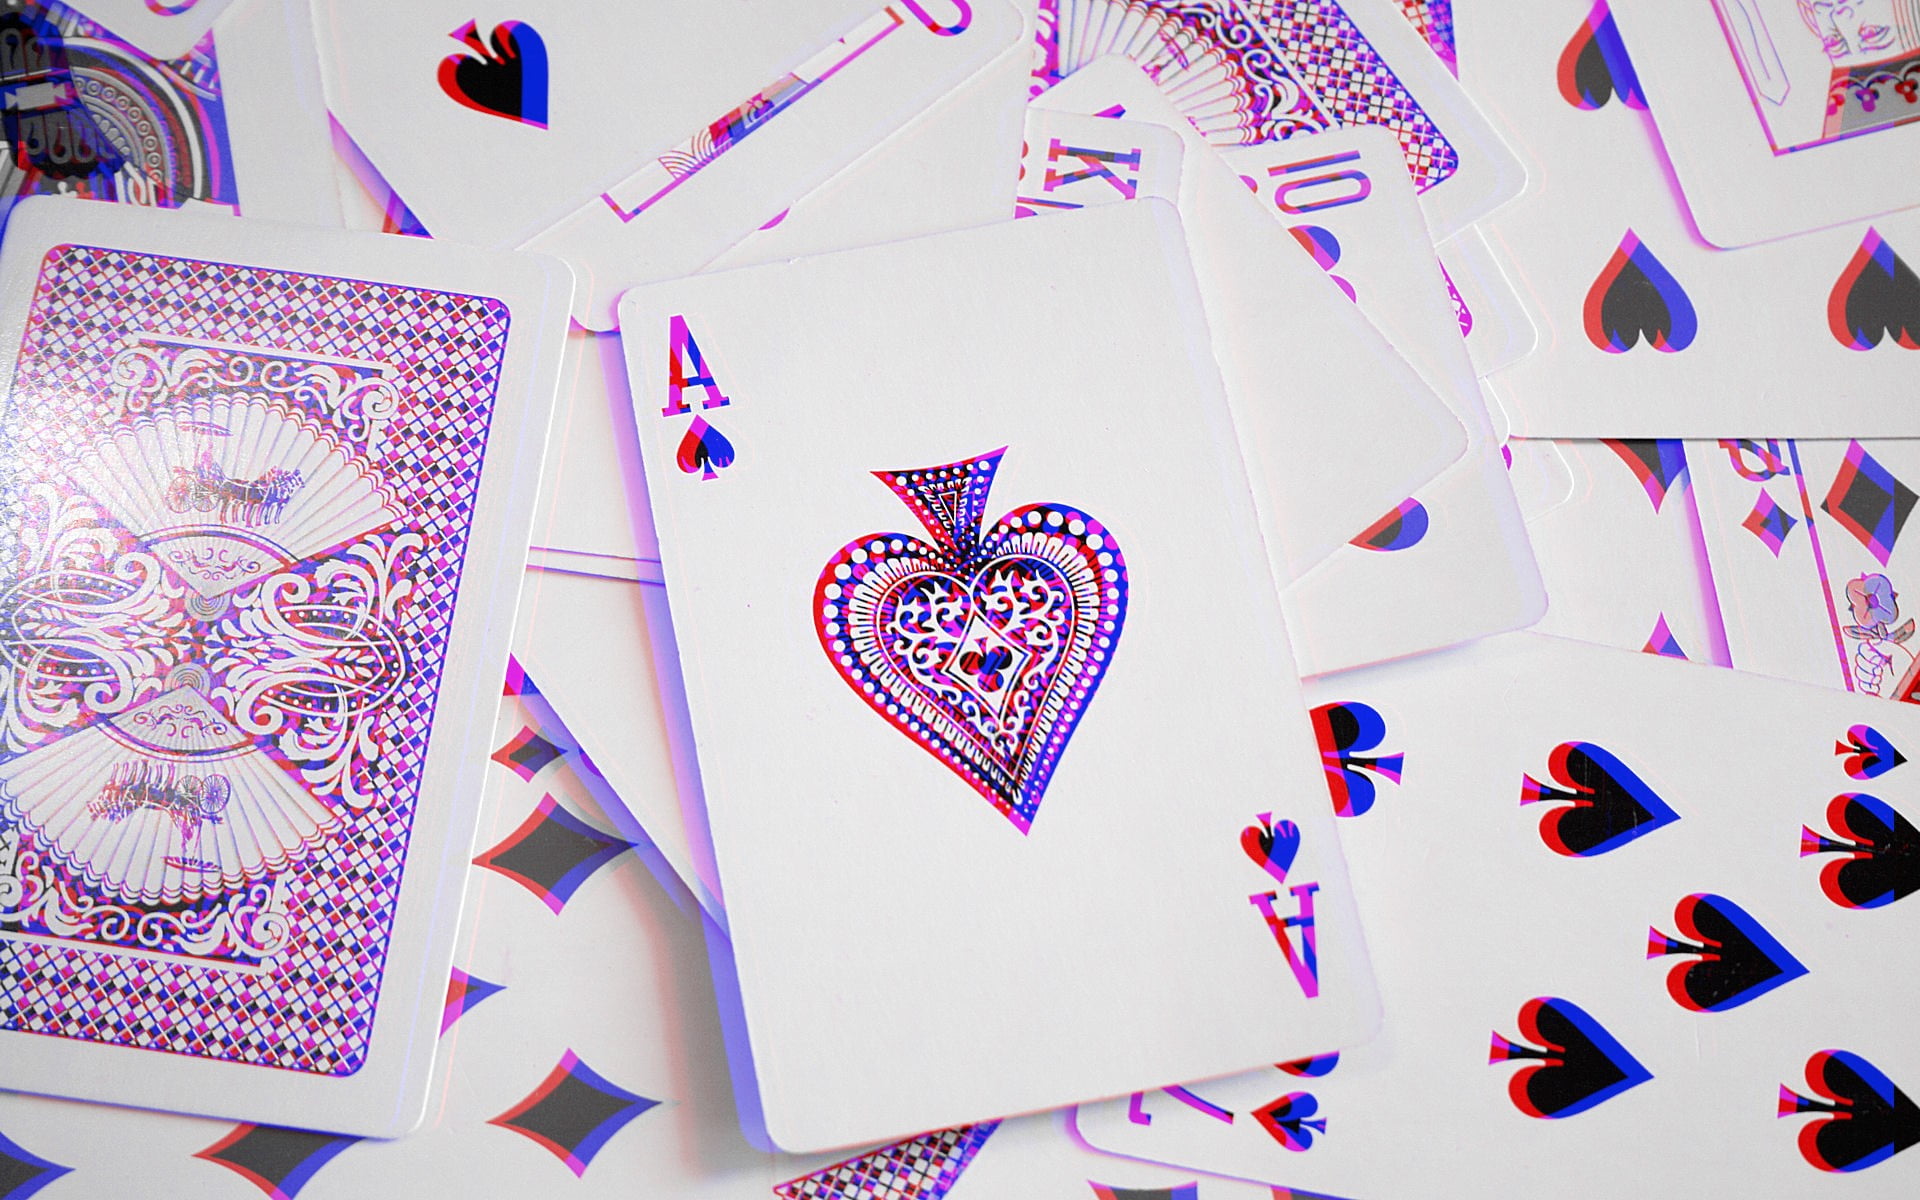 playing card lot, anaglyph 3D, aces, cards, art and craft, indoors